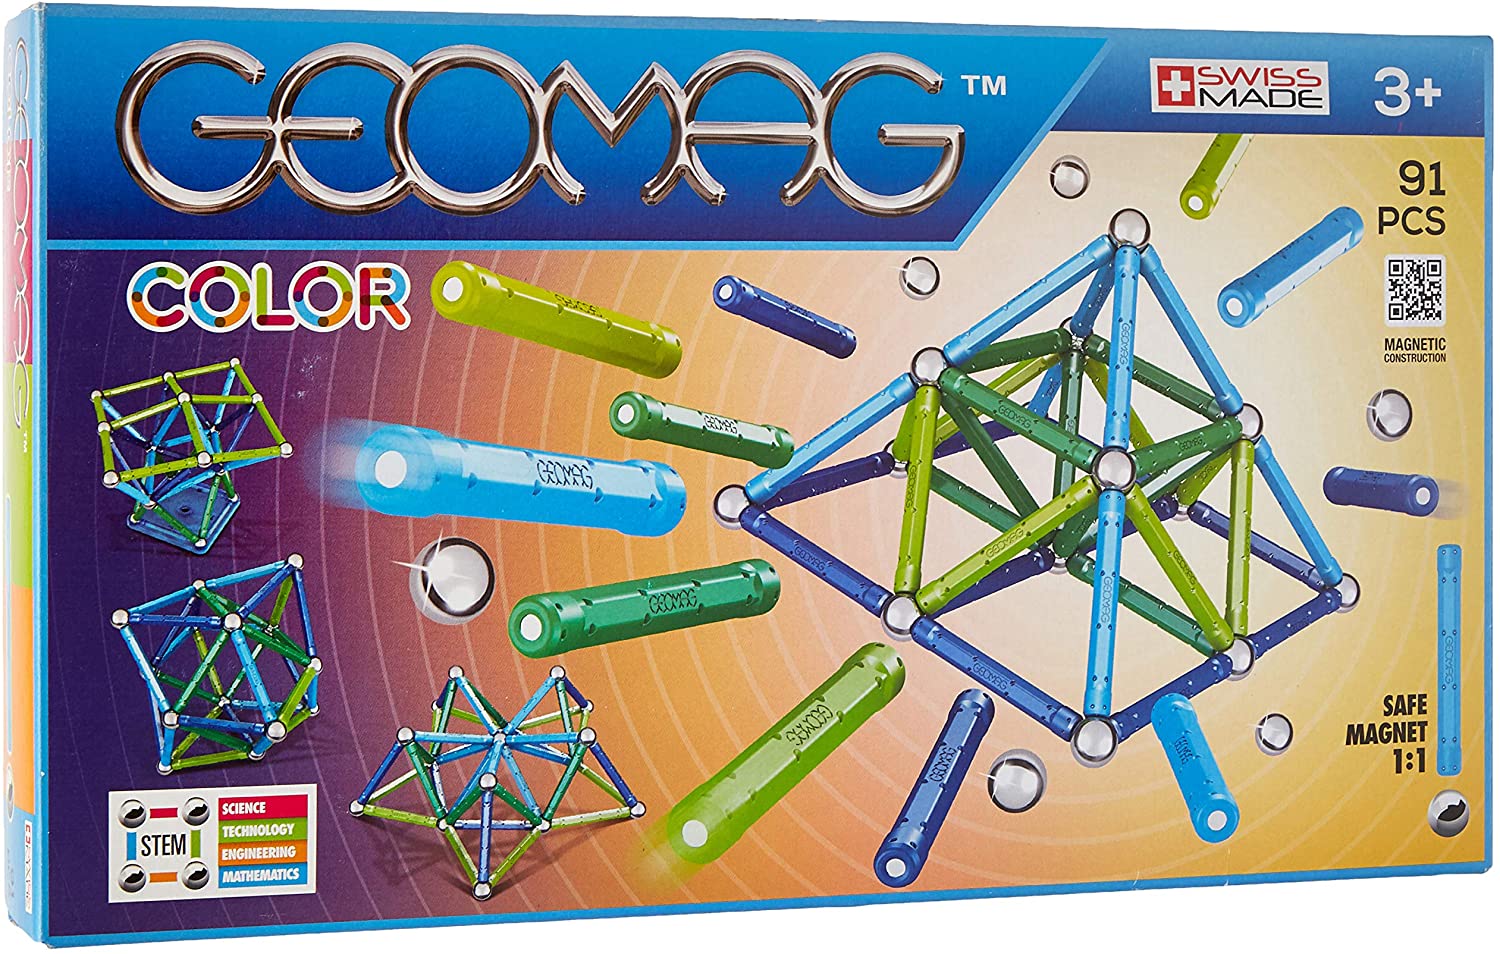 Geomag Construction Toy